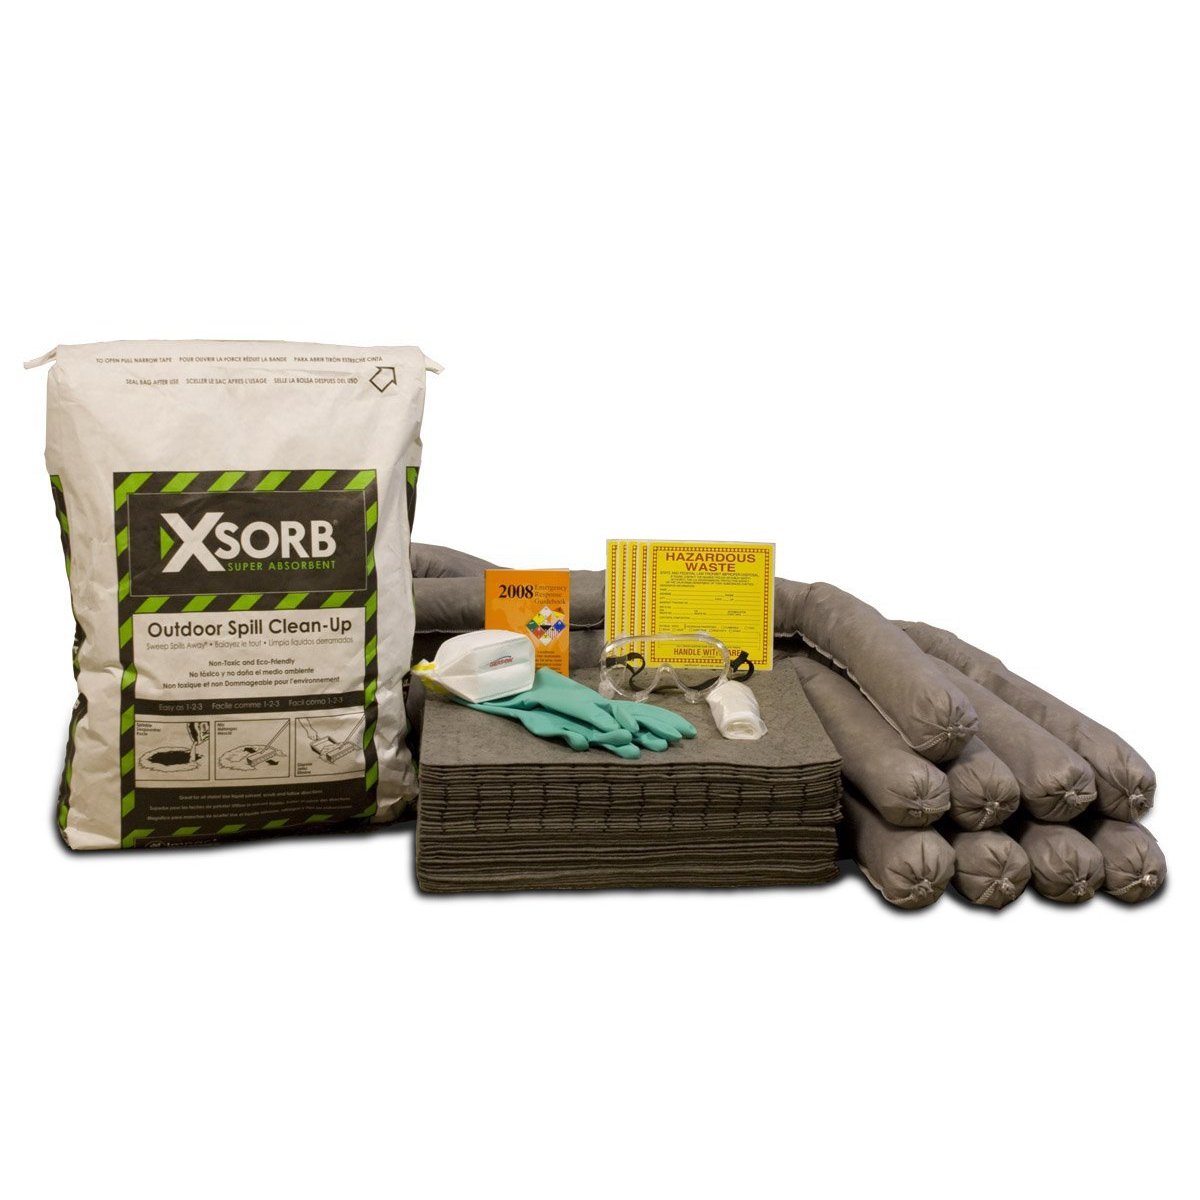 XSORB Outdoor All-Purpose 30 gal Labpack Spill Kit - 1 DRUM